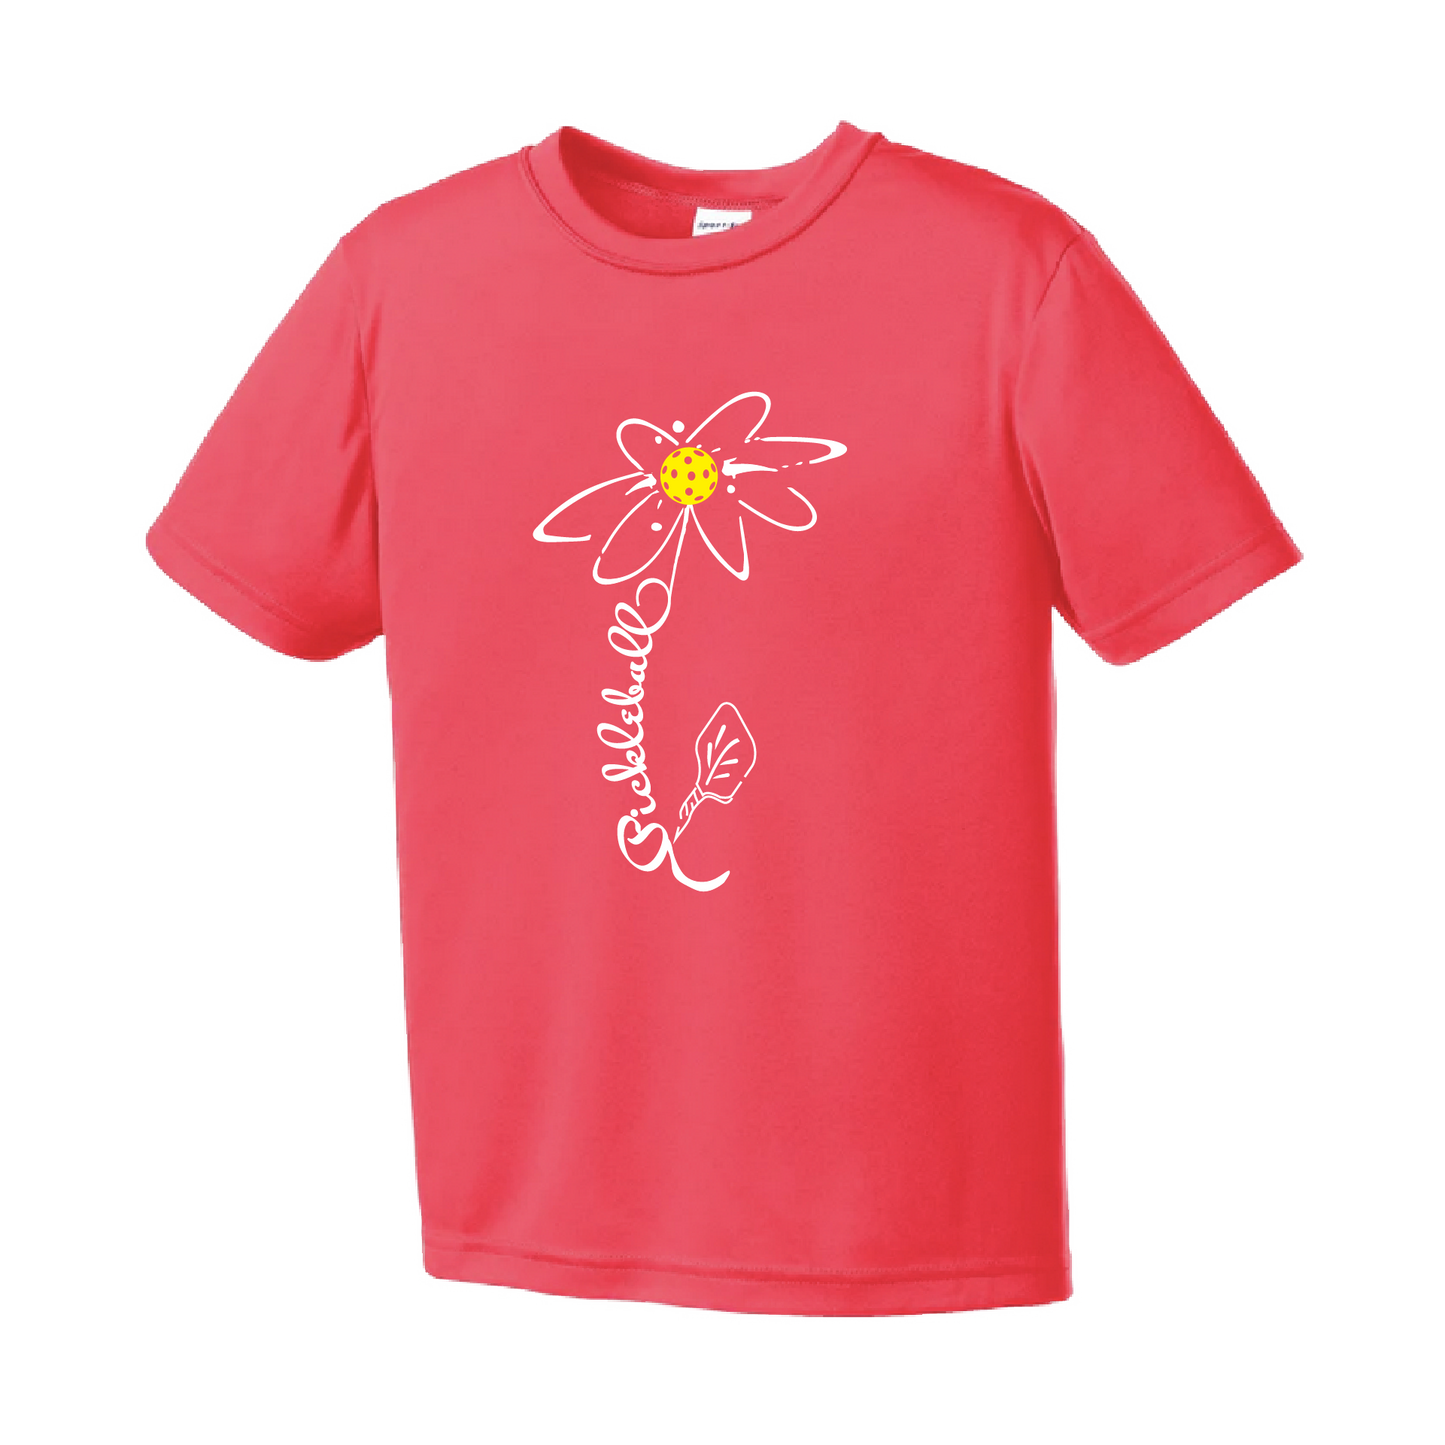 Pickleball Design: Pickleball Flower  Youth Style: Short Sleeve  Shirts are lightweight, roomy and highly breathable. These moisture-wicking shirts are designed for athletic performance. They feature PosiCharge technology to lock in color and prevent logos from fading. Removable tag and set-in sleeves for comfort.